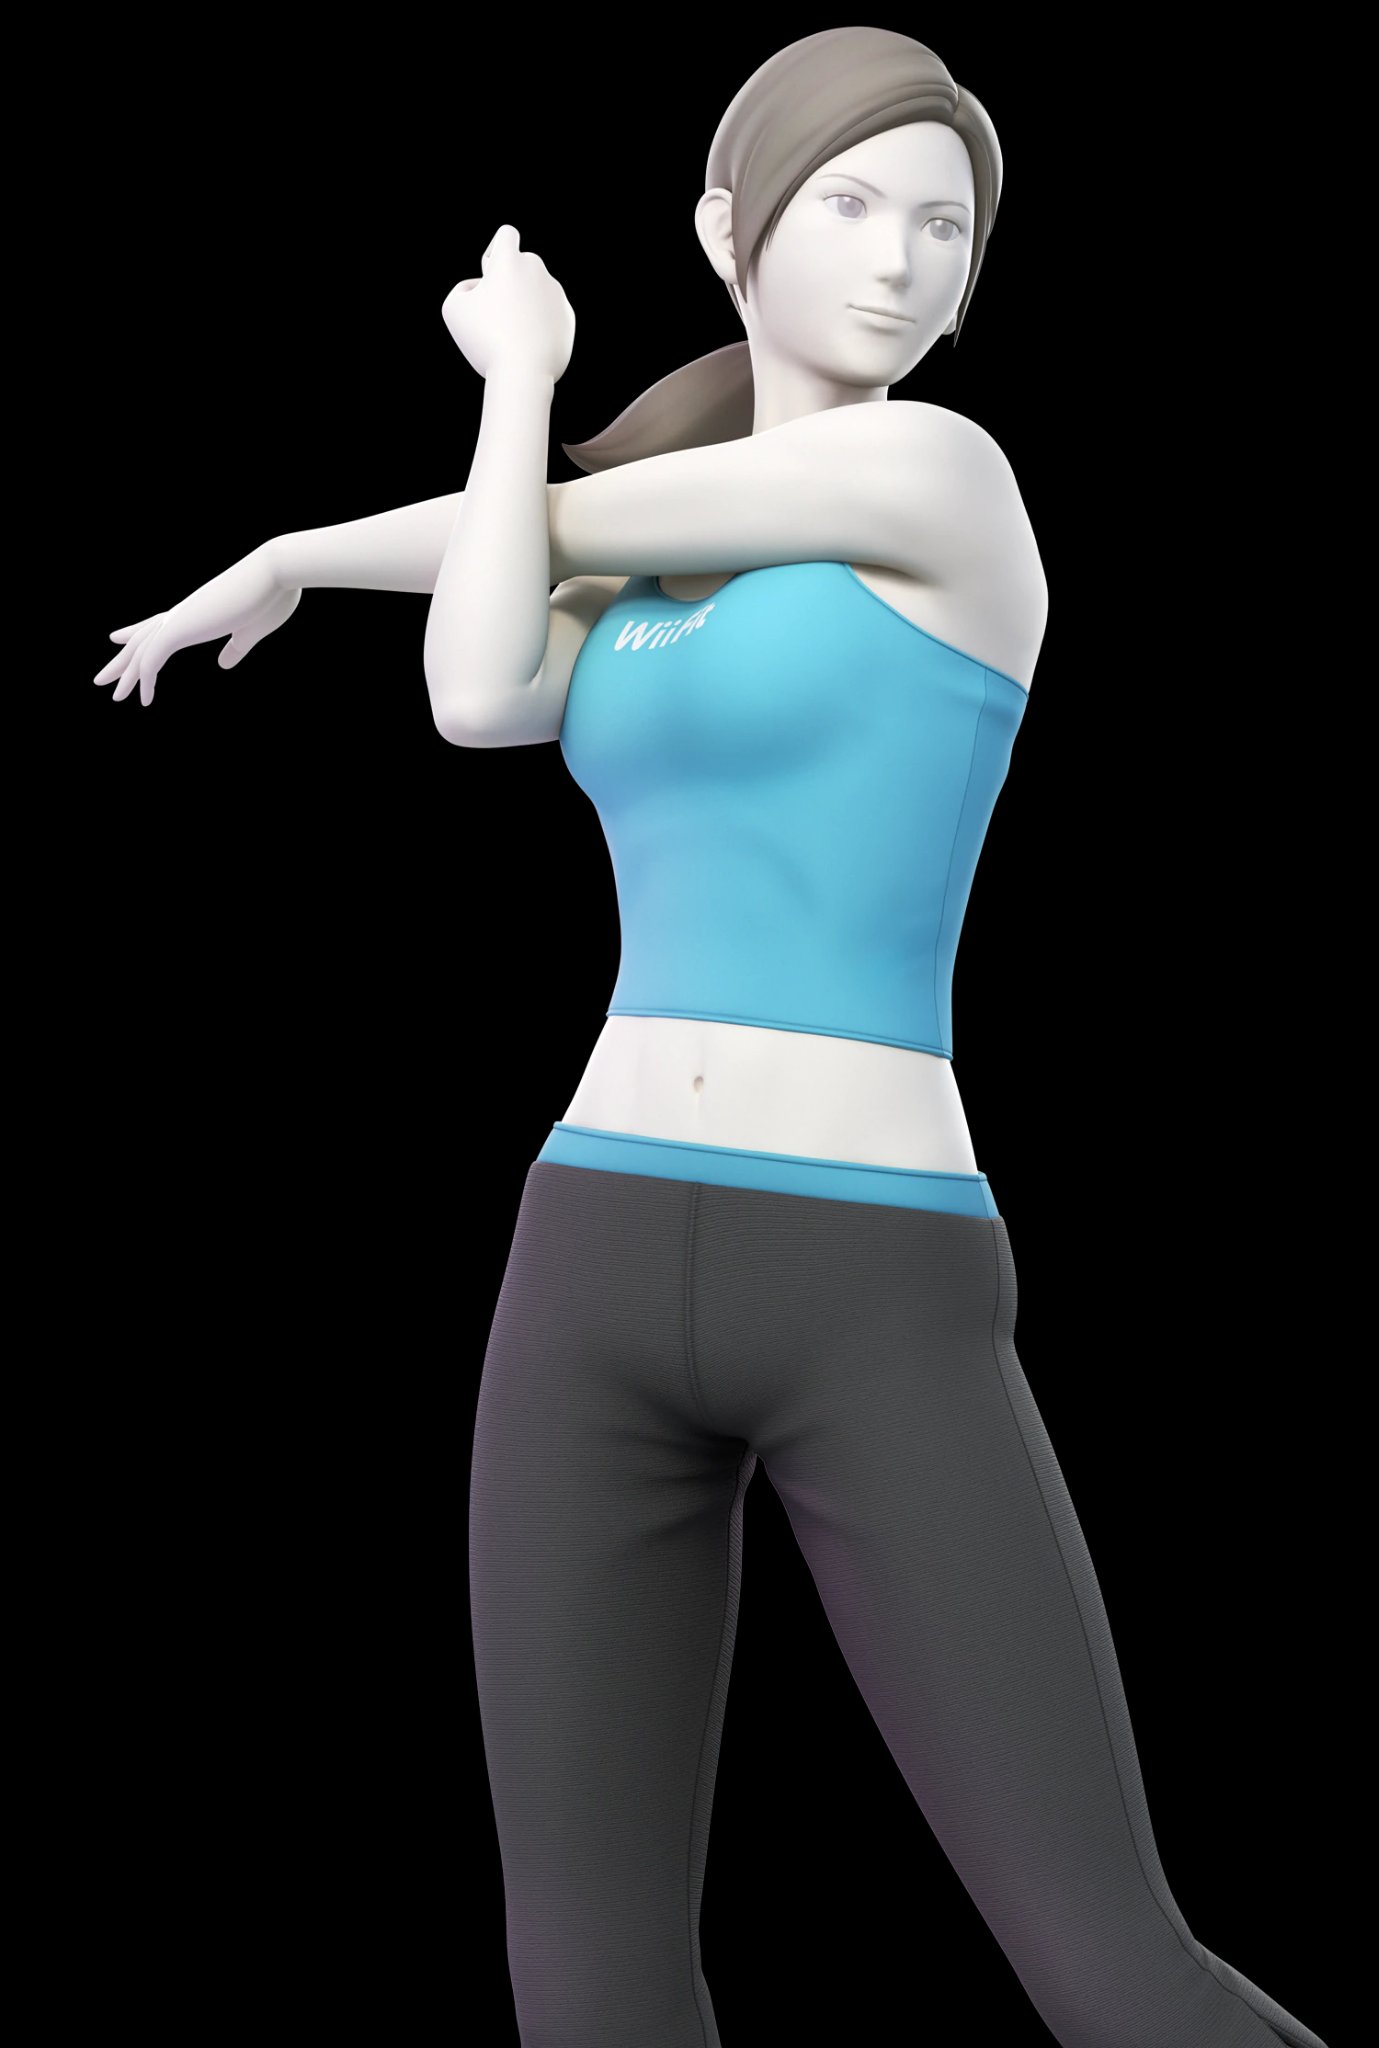 debbie owen recommends Wii Fit Trainer Tied Up